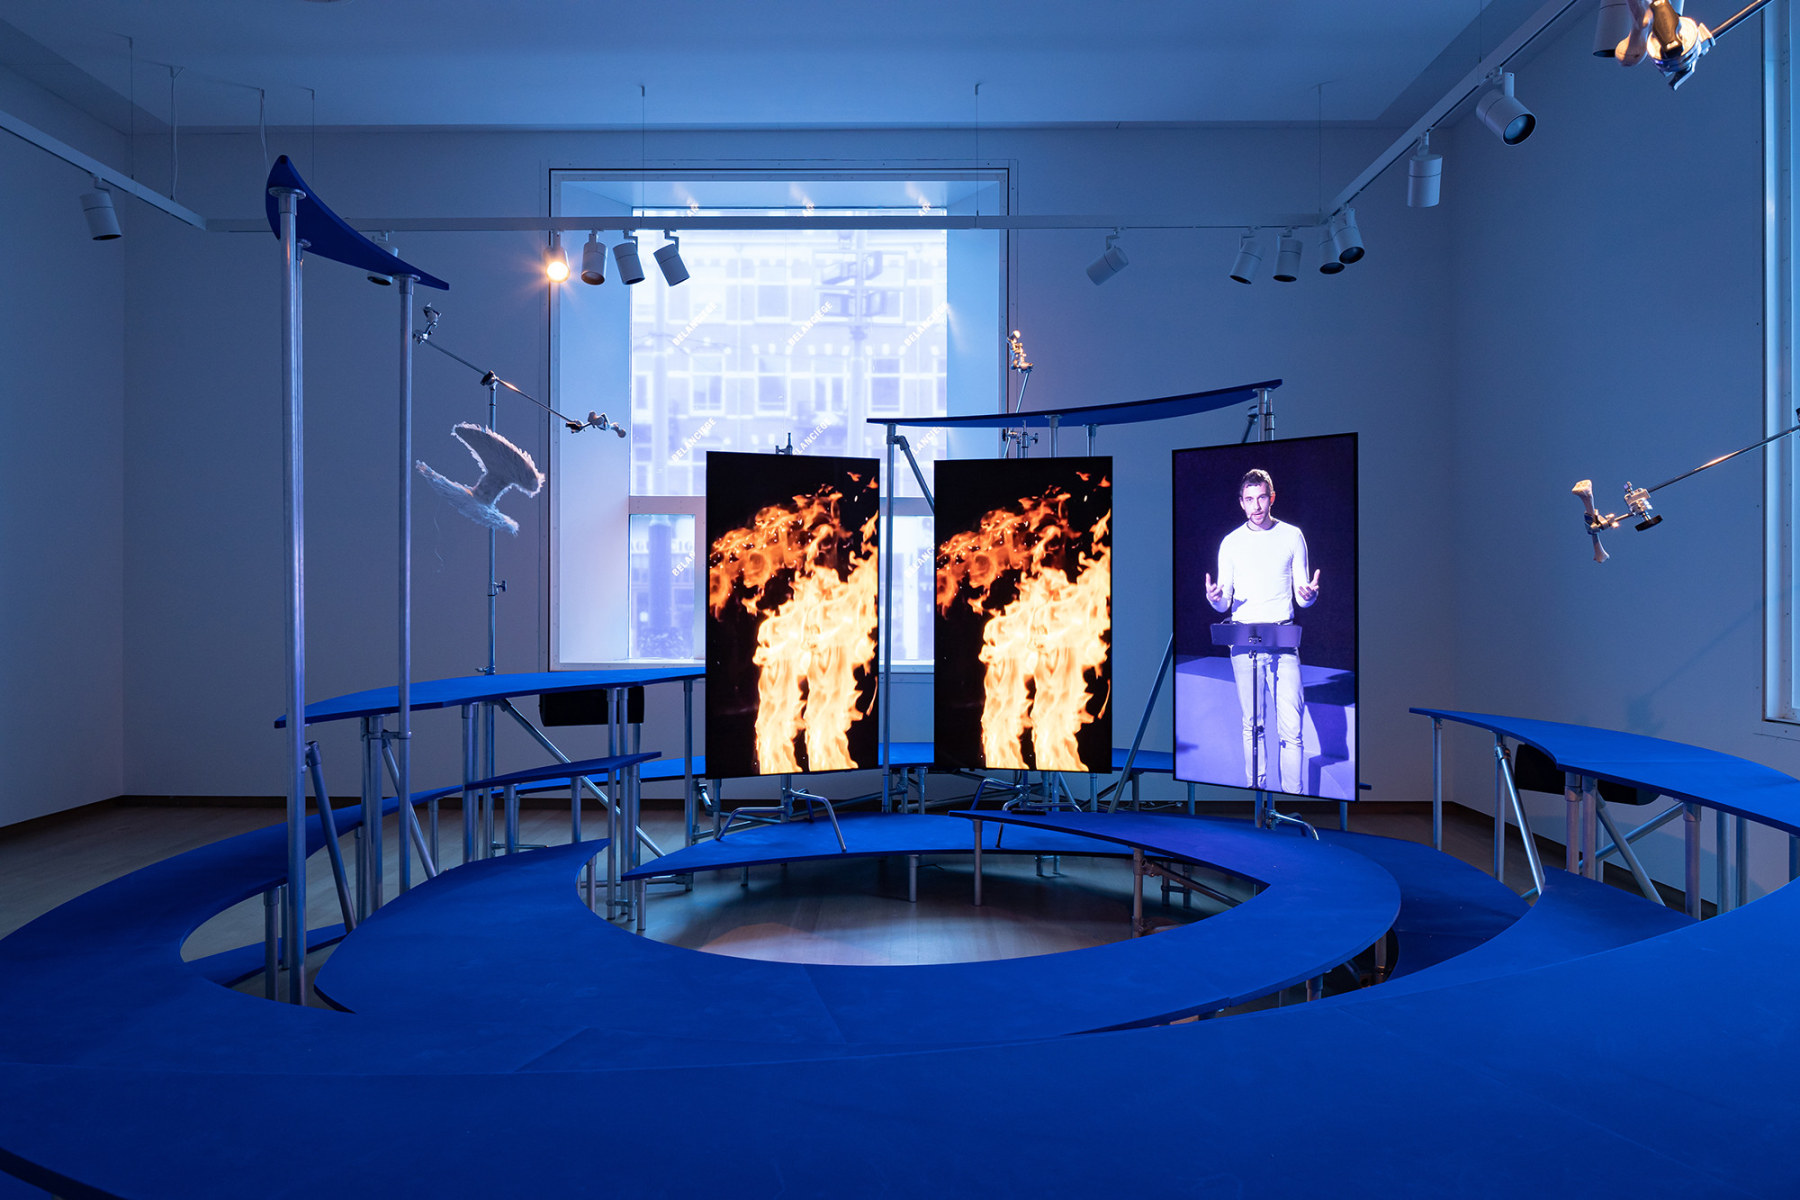 Hito Steyerl, Hito Steyerl: I WIll Survive